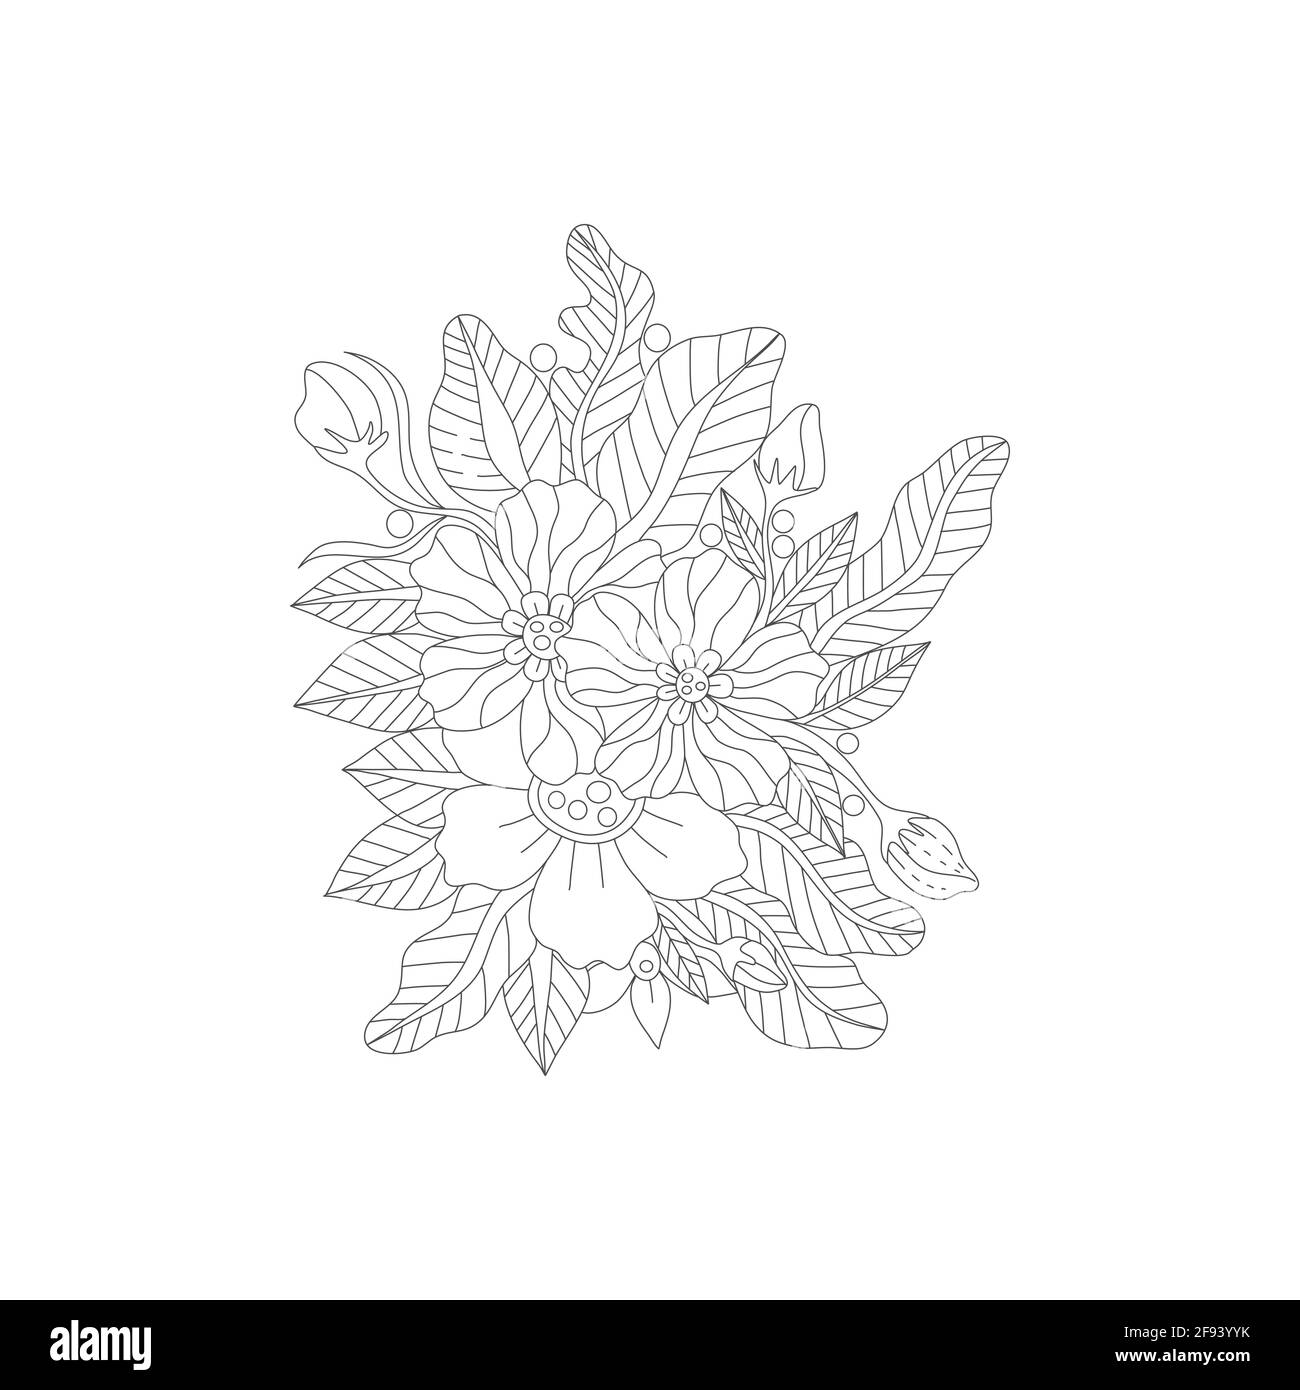 Adult coloring book Black and White Stock Photos & Images - Alamy